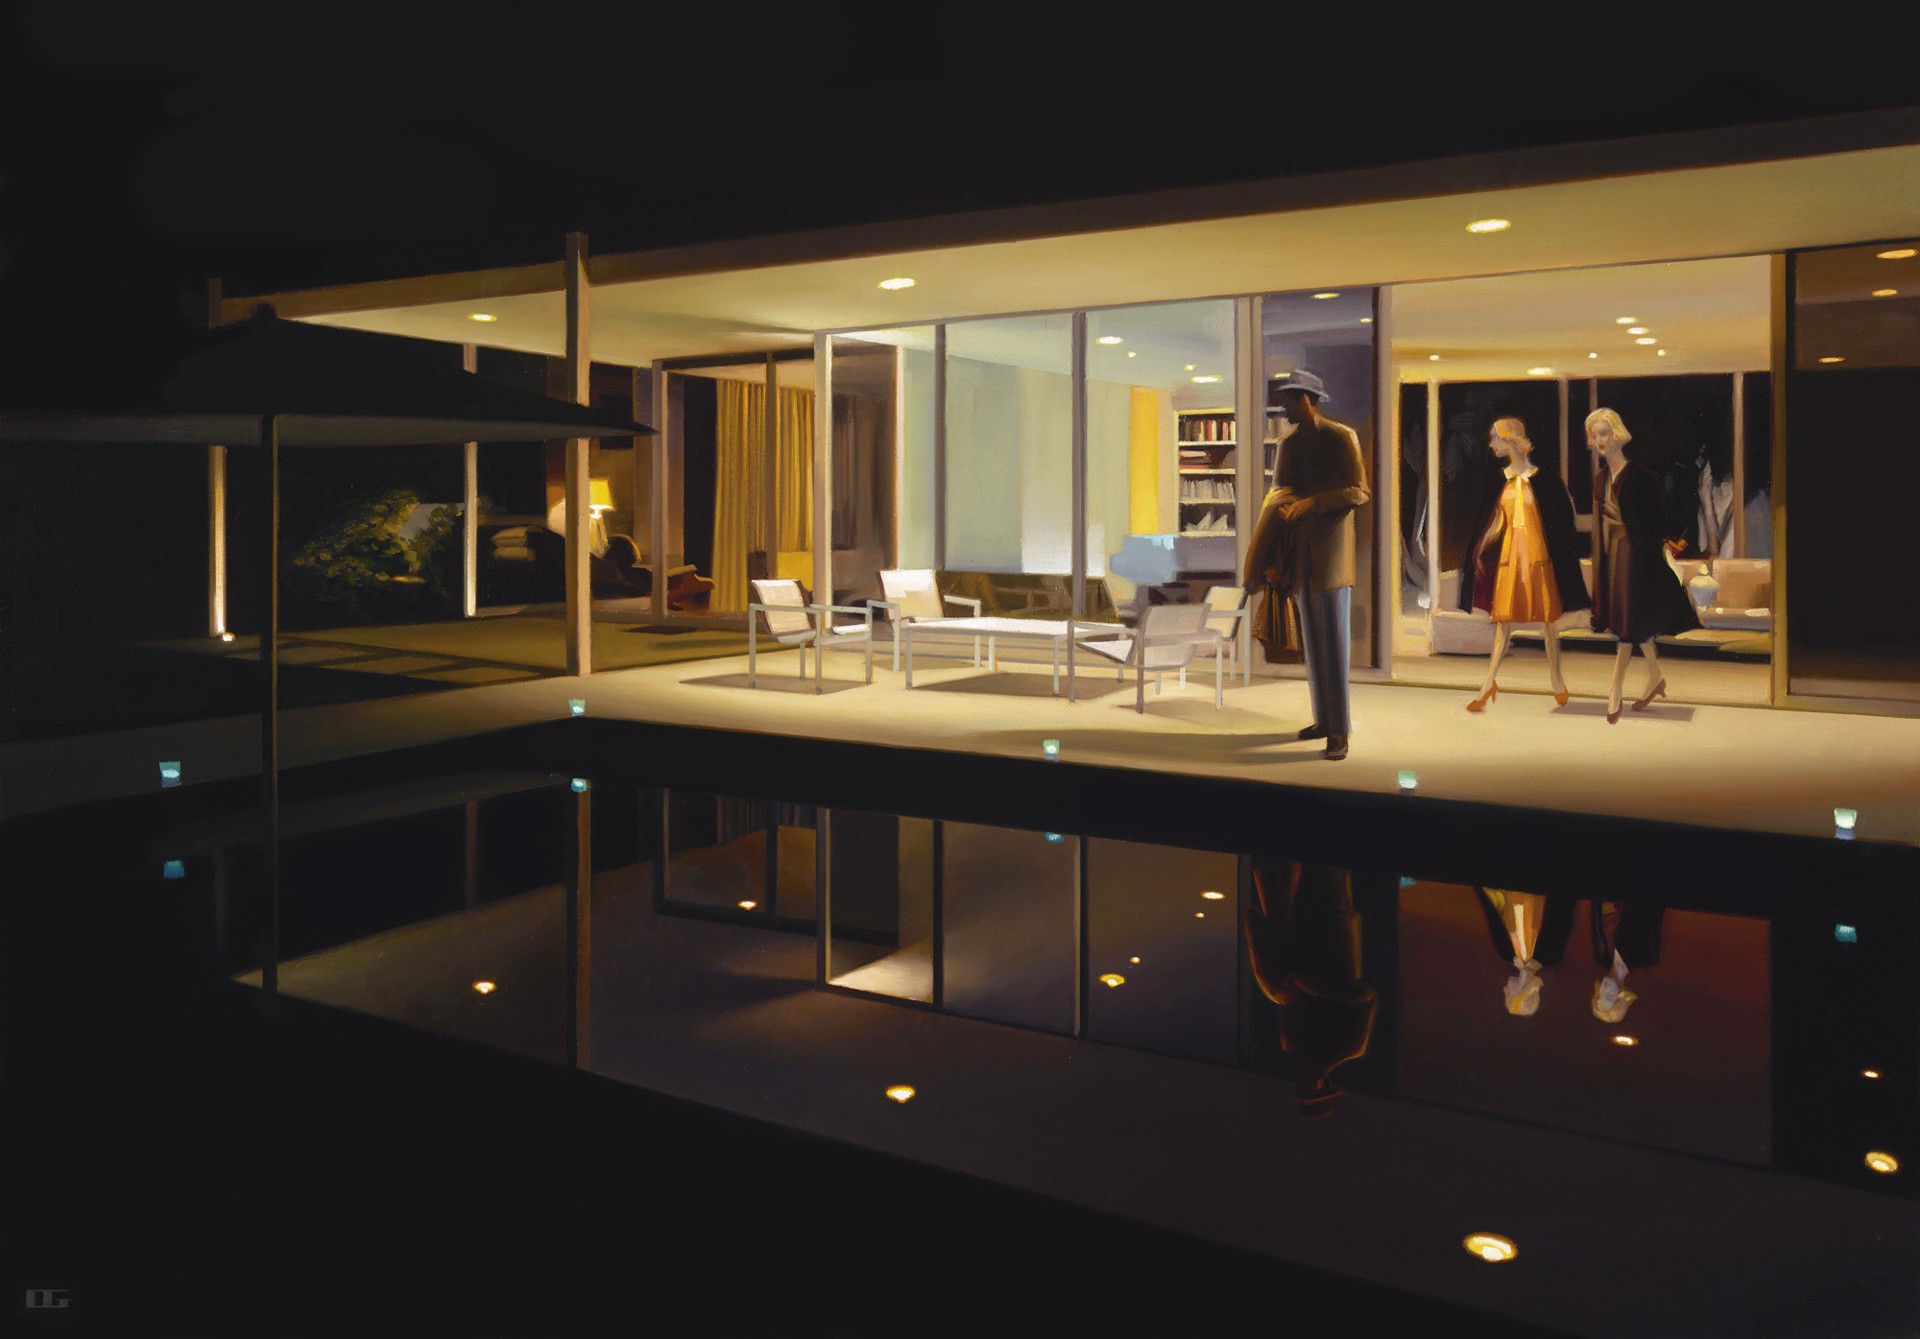 Double Date (S/N) by Carrie Graber